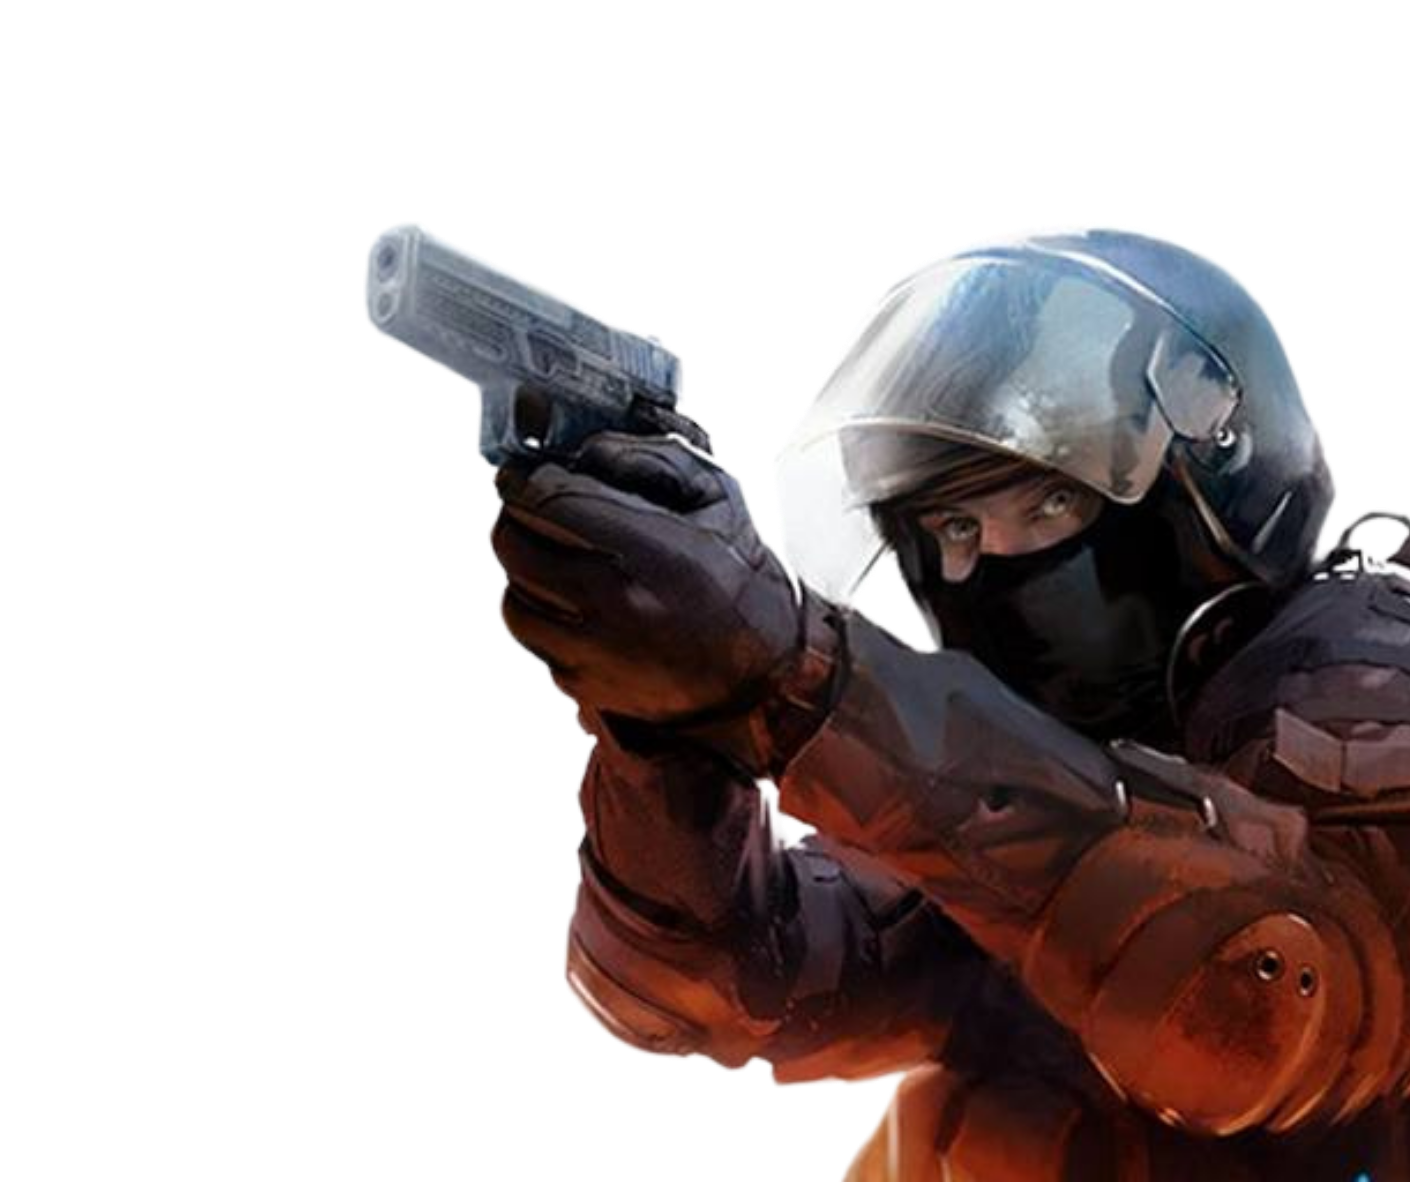 Image of one of the characters of the videogame 'Counter Strike'